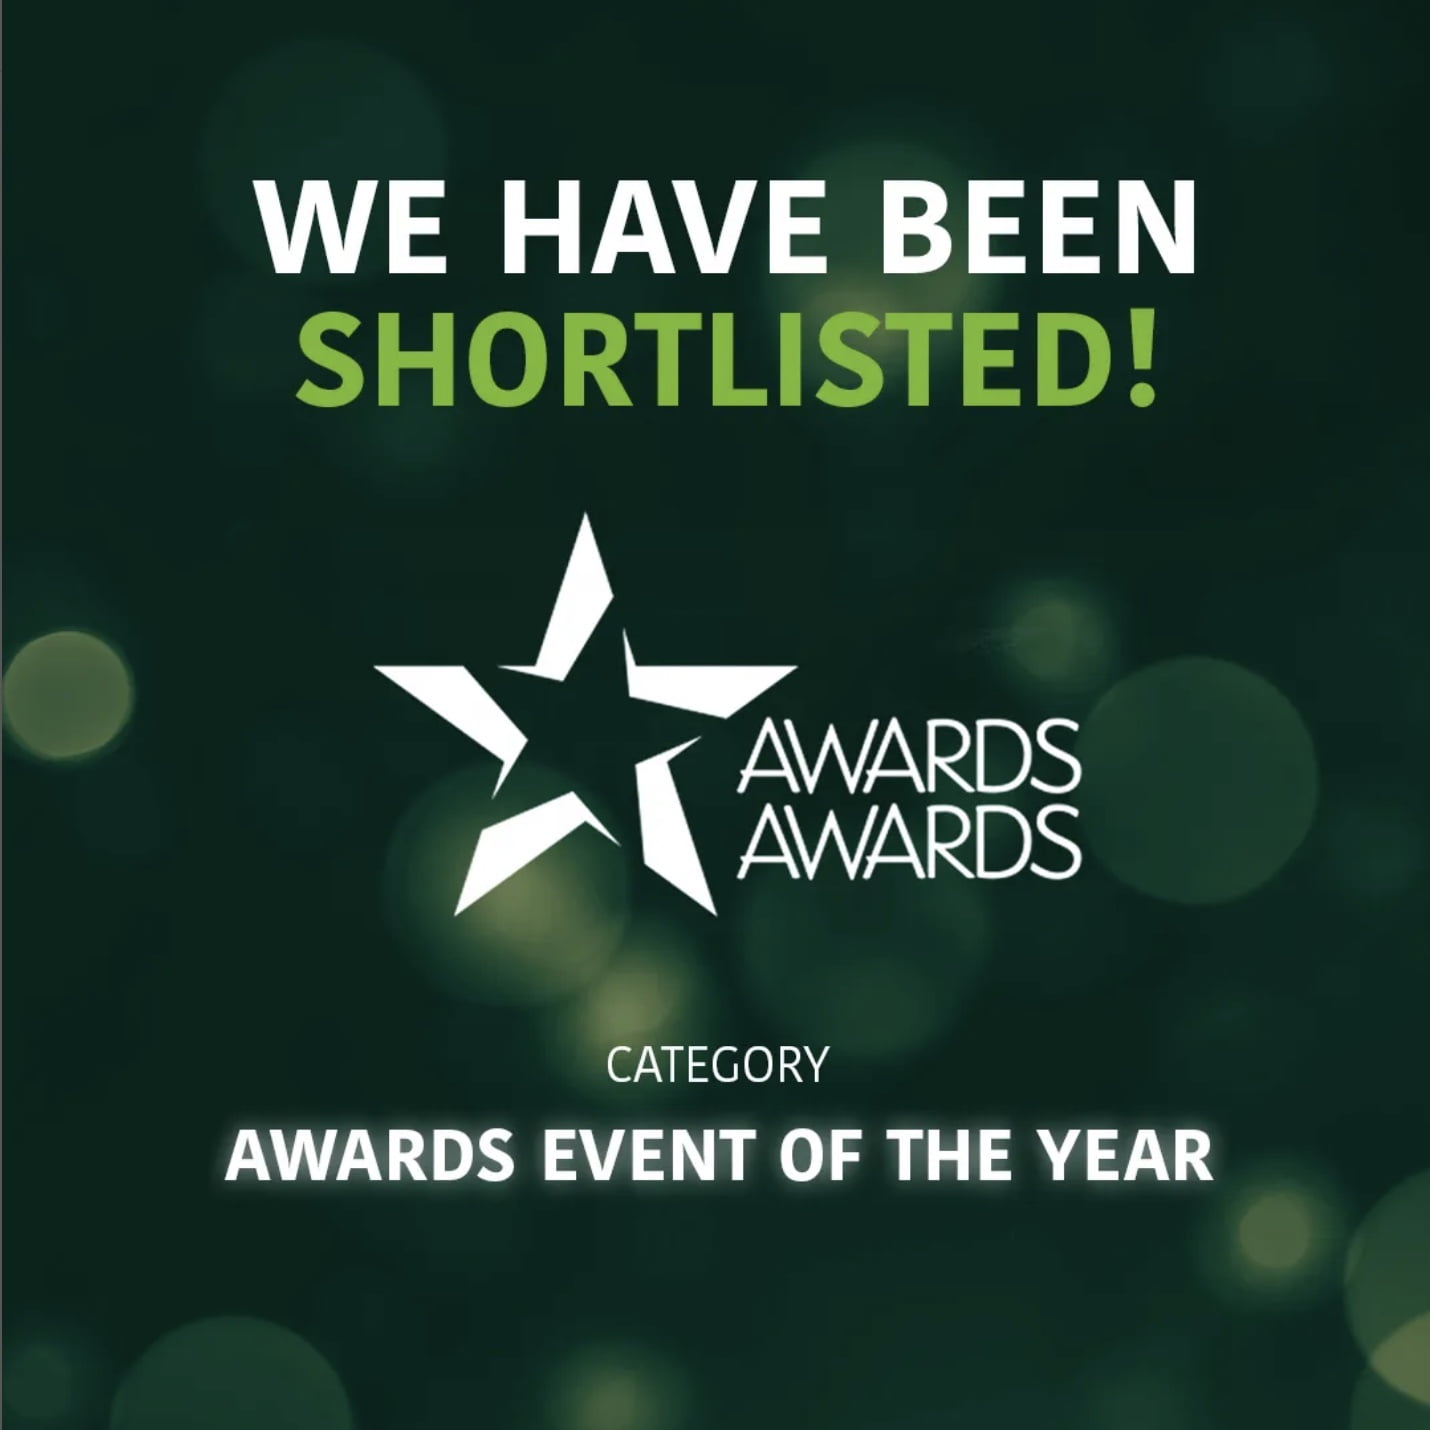 Shortlisted for Awards Event of the Year